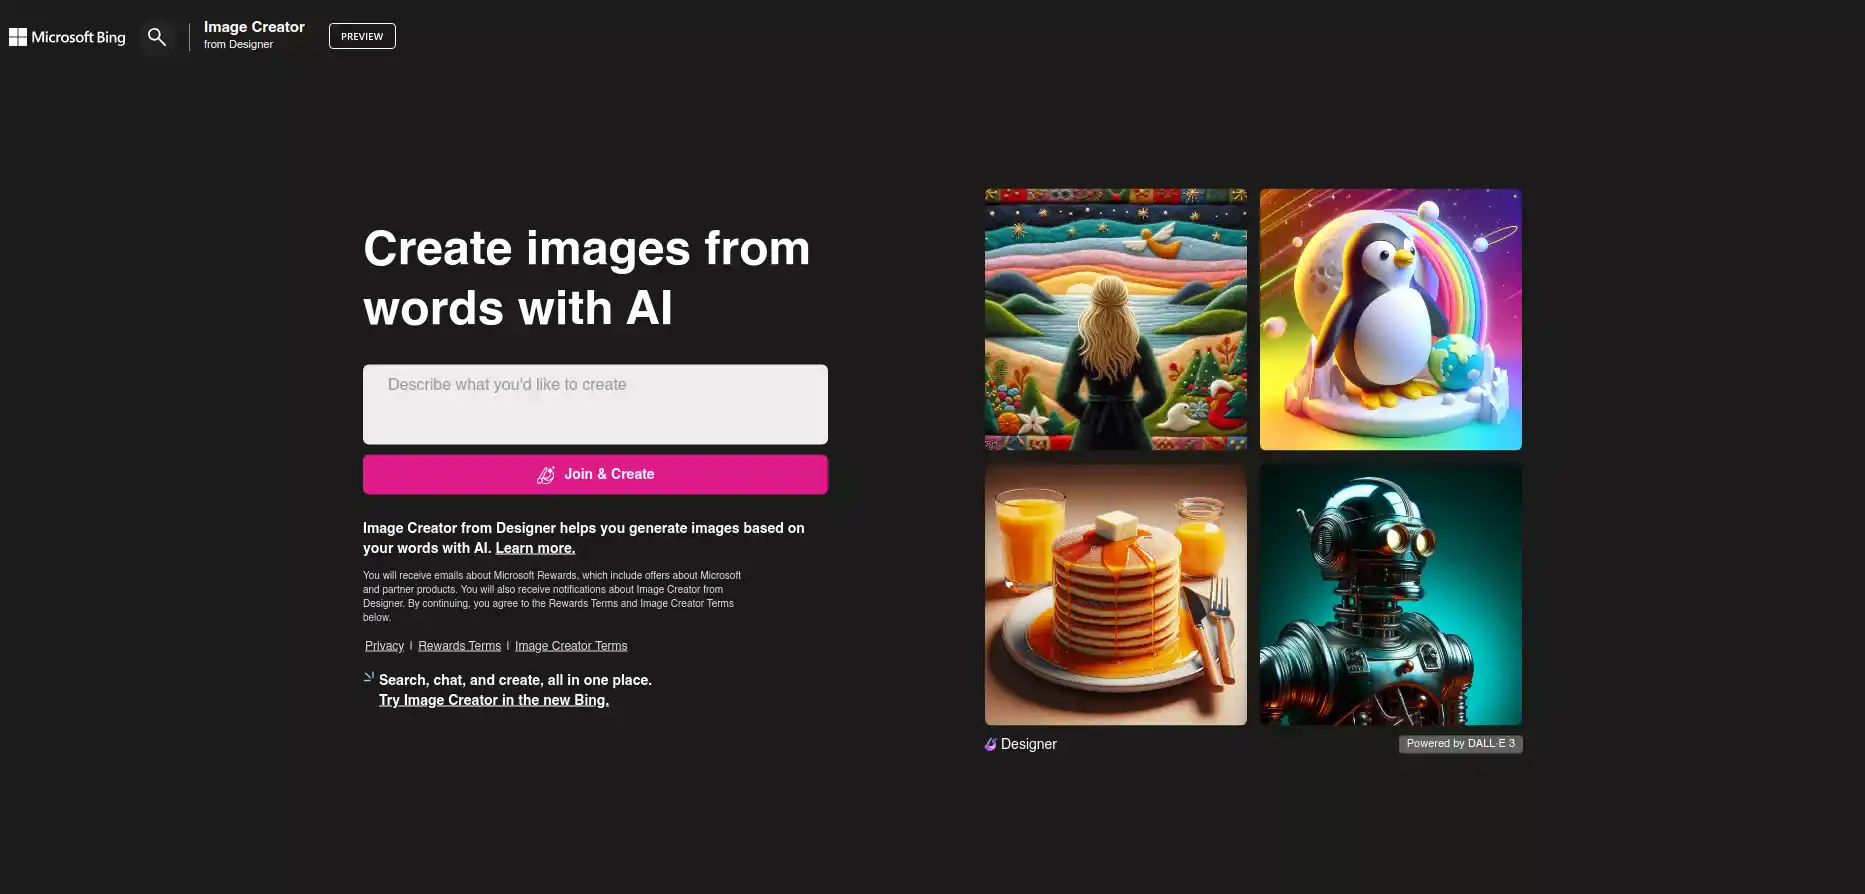 How To Generate Images in Bing AI: How To Use Bing AI Image Generator